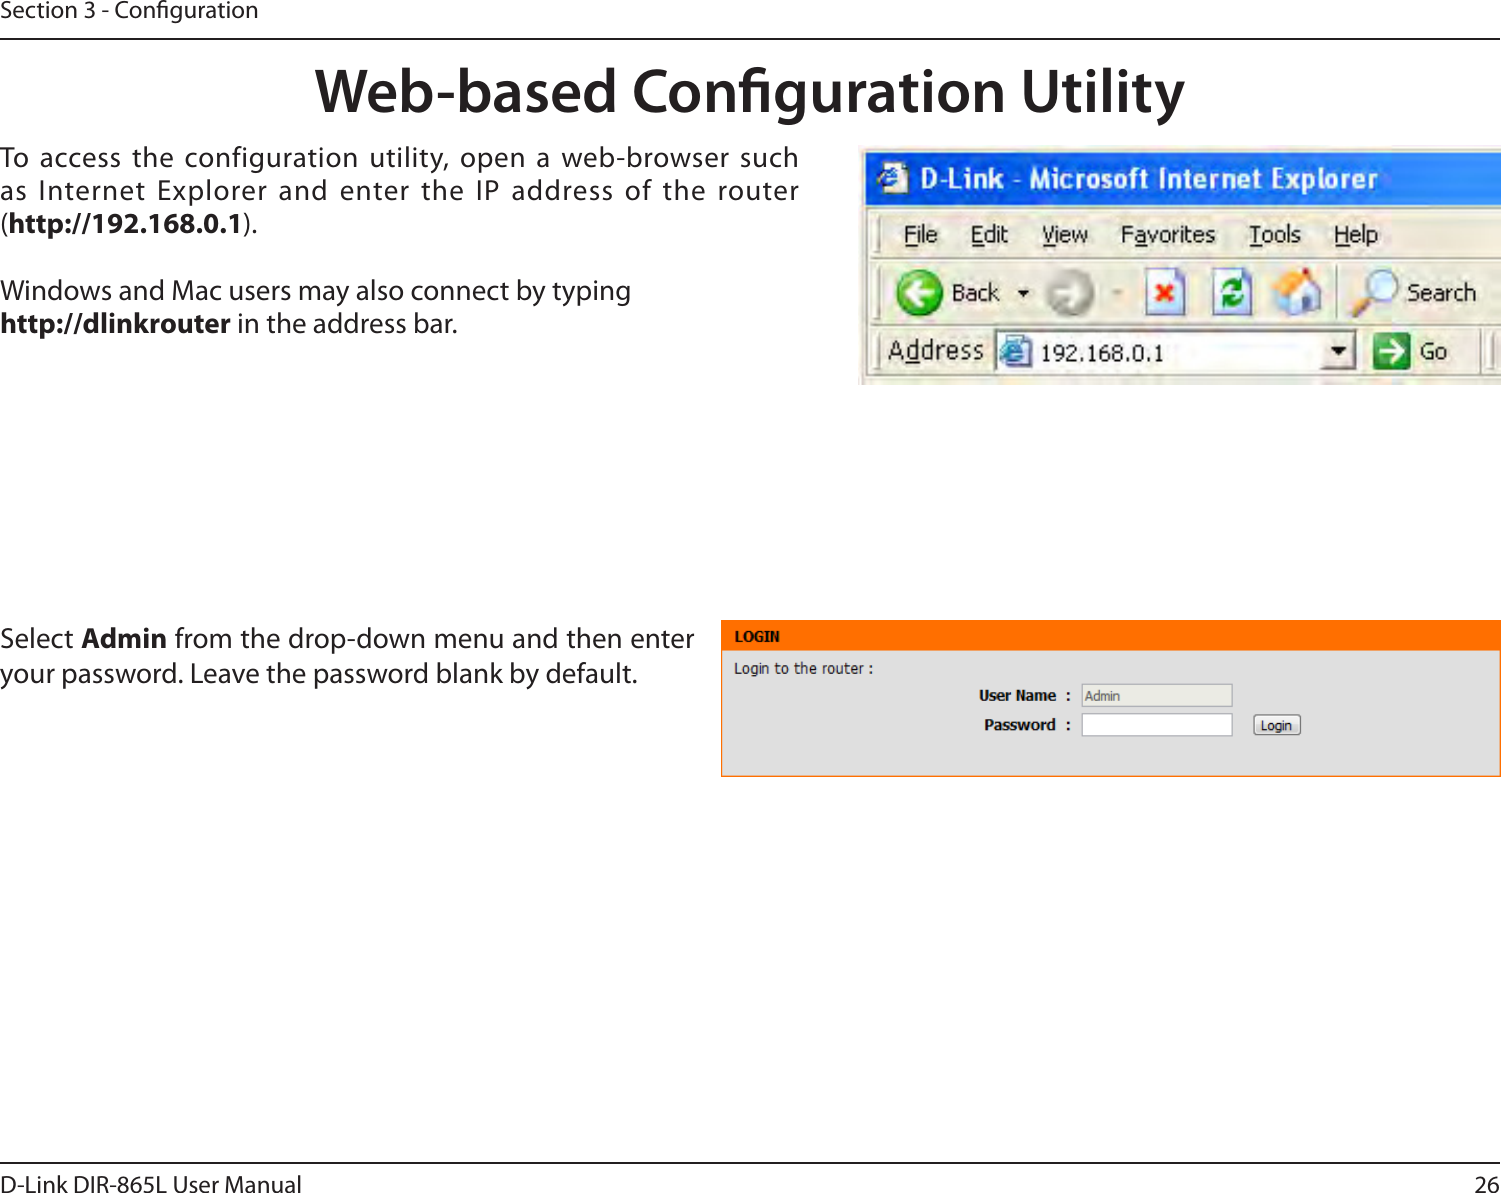 26D-Link DIR-865L User ManualSection 3 - CongurationWeb-based Conguration UtilitySelect Admin from the drop-down menu and then enter your password. Leave the password blank by default.To  access  the  configuration  utility,  open  a  web-browser  such as Internet Explorer and  enter the  IP address of the router (http://192.168.0.1).Windows and Mac users may also connect by typinghttp://dlinkrouter in the address bar.